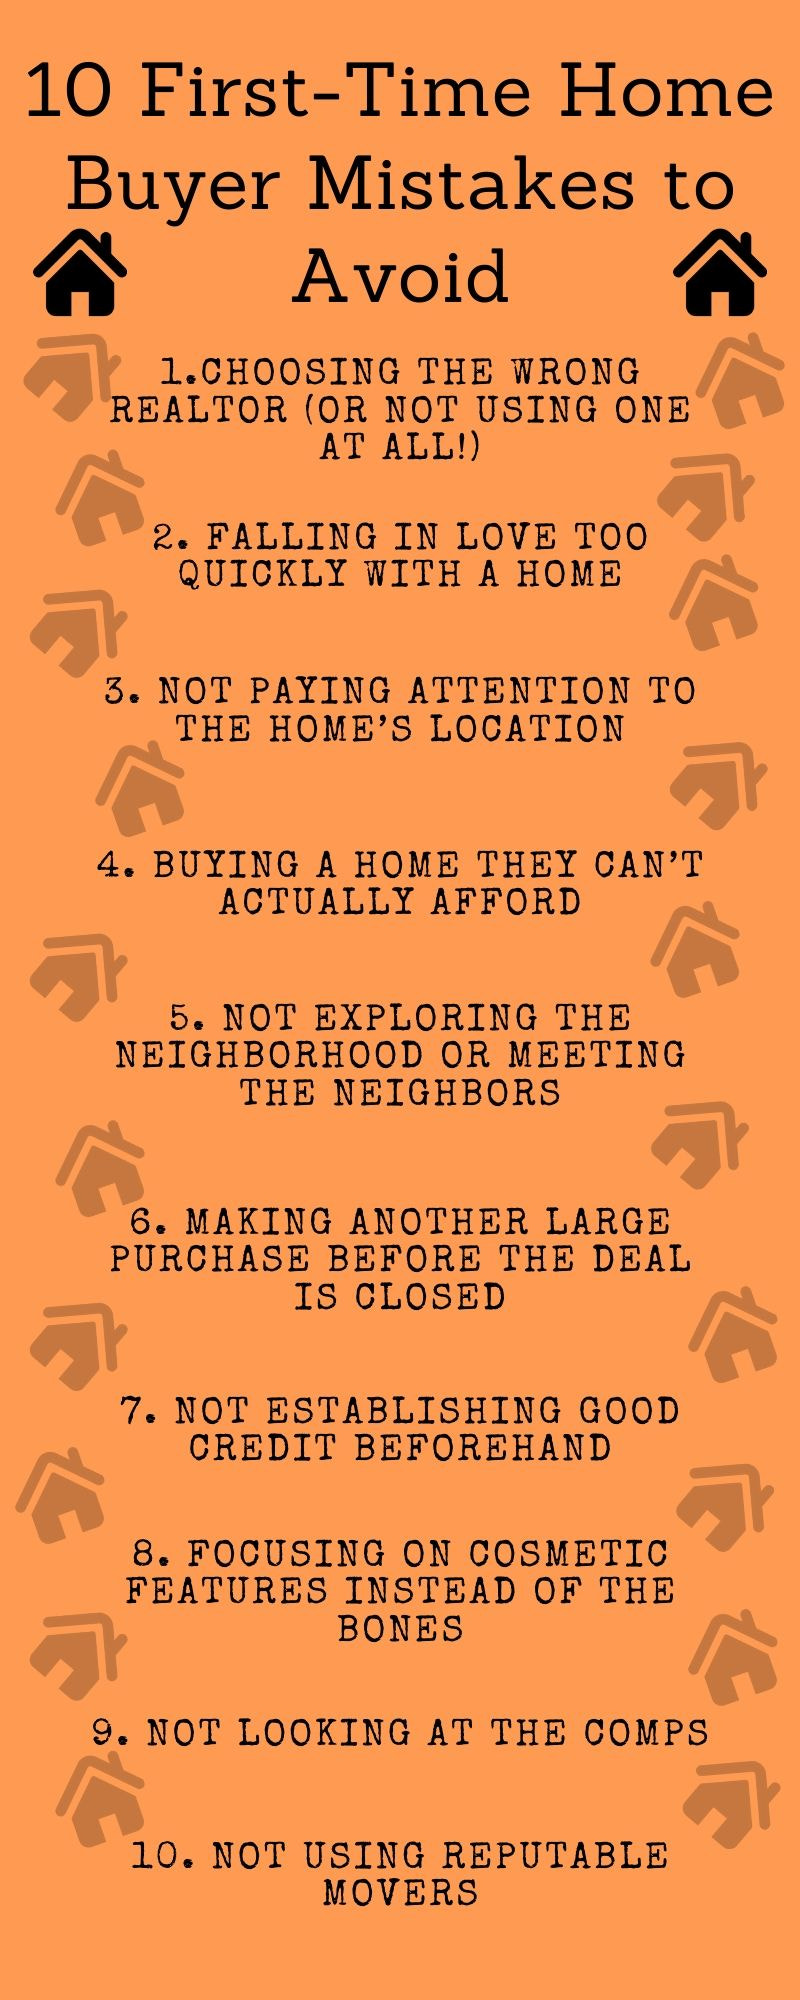 13 First-Time Home Buyer Mistakes to Avoid